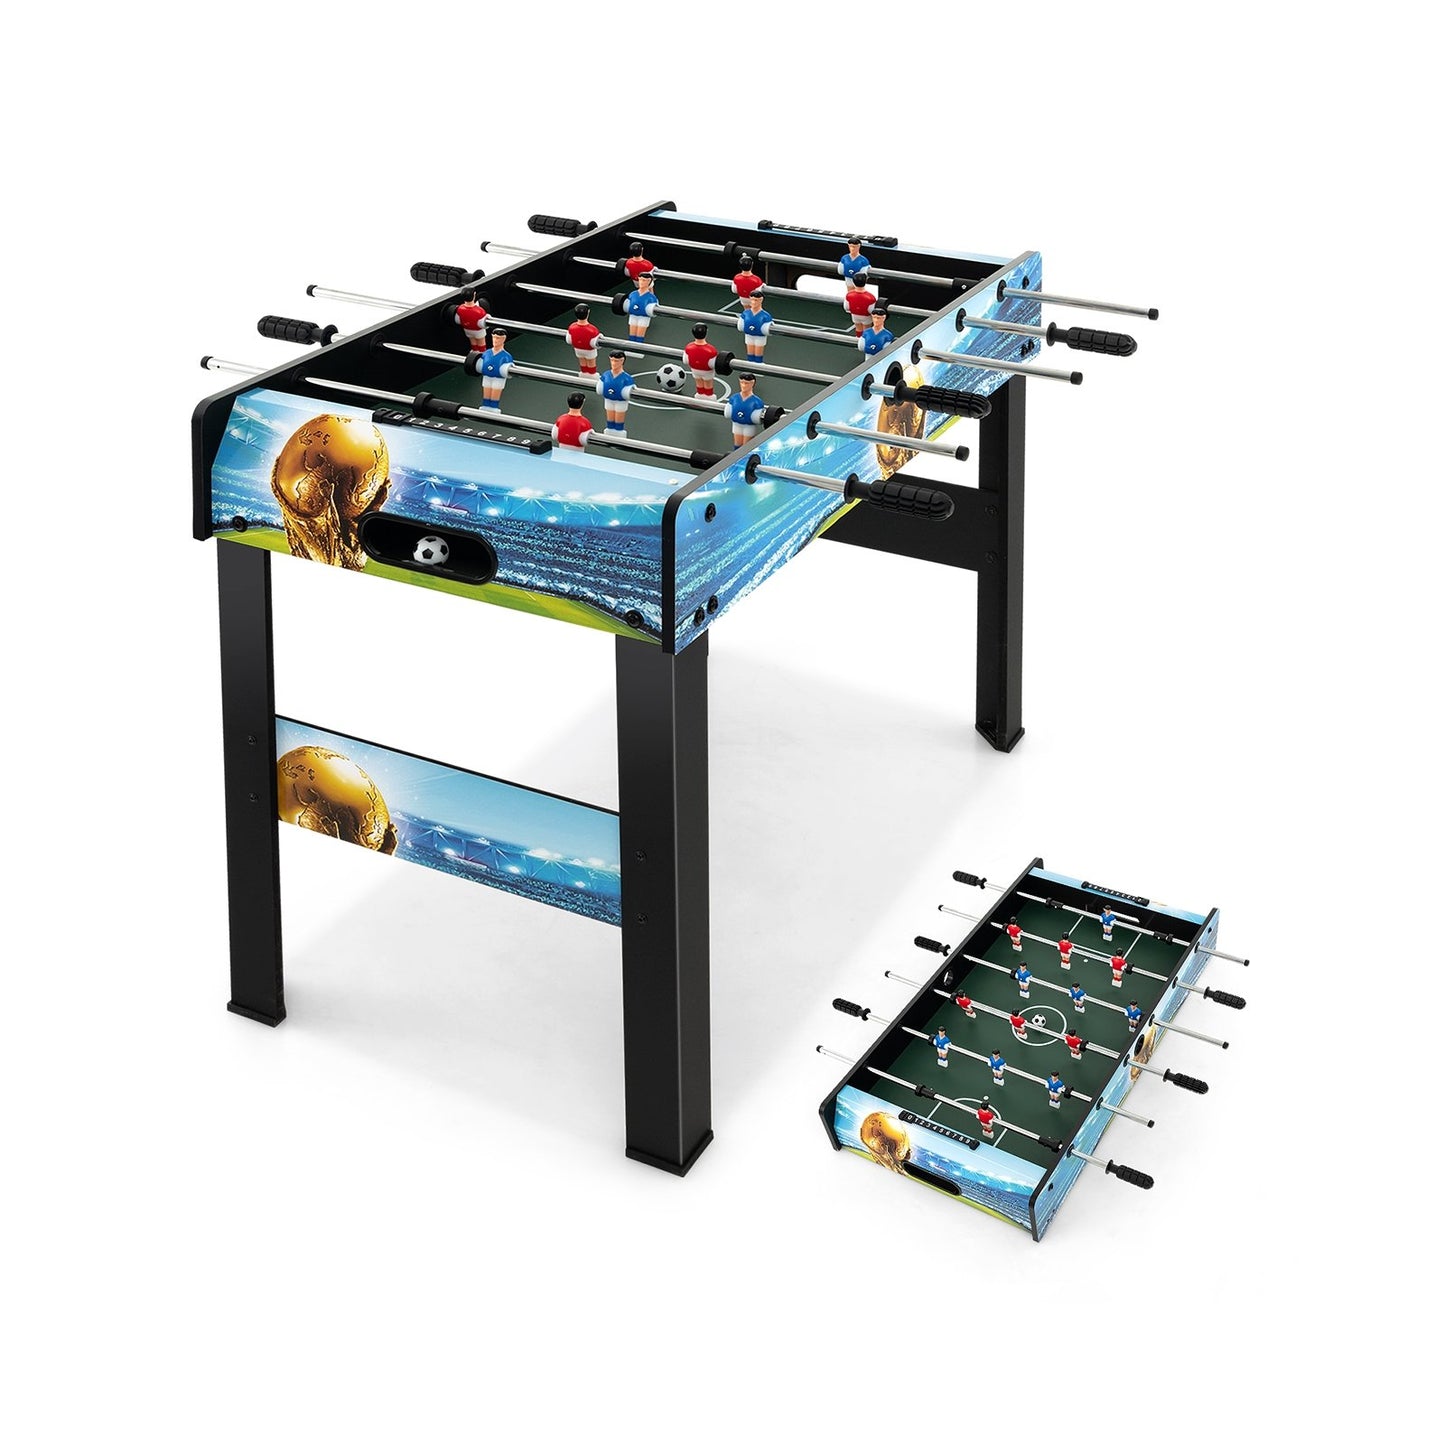 37 Inch Mini Foosball Table with Score Keeper and Removable Legs, Blue